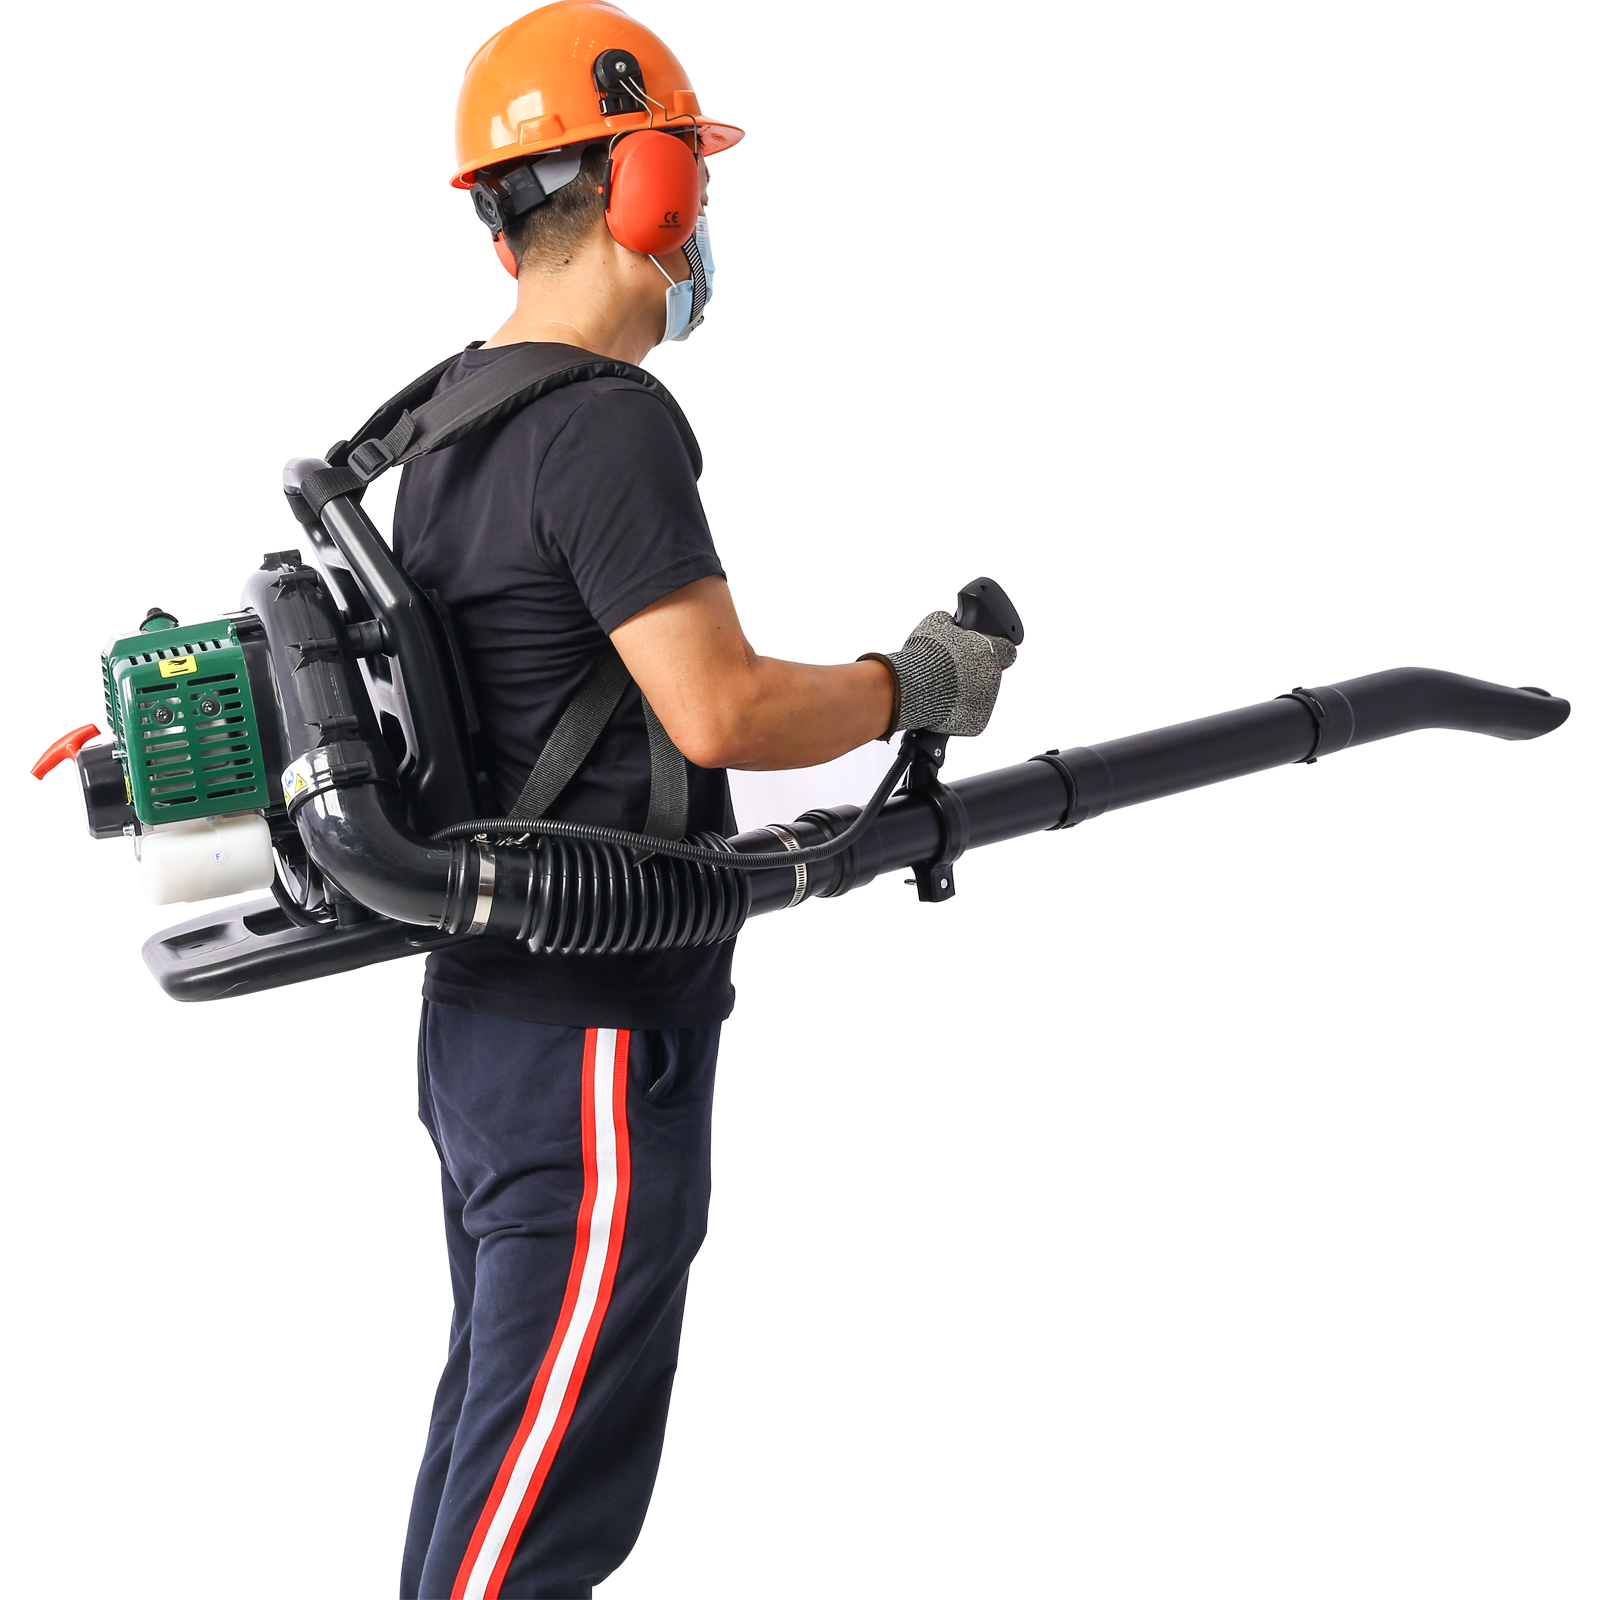 

Powerpro 52cc Gas Backpack Leaf Blower With High-power Engine And Adjustable Extension - Effortless Yard Cleanup Solution